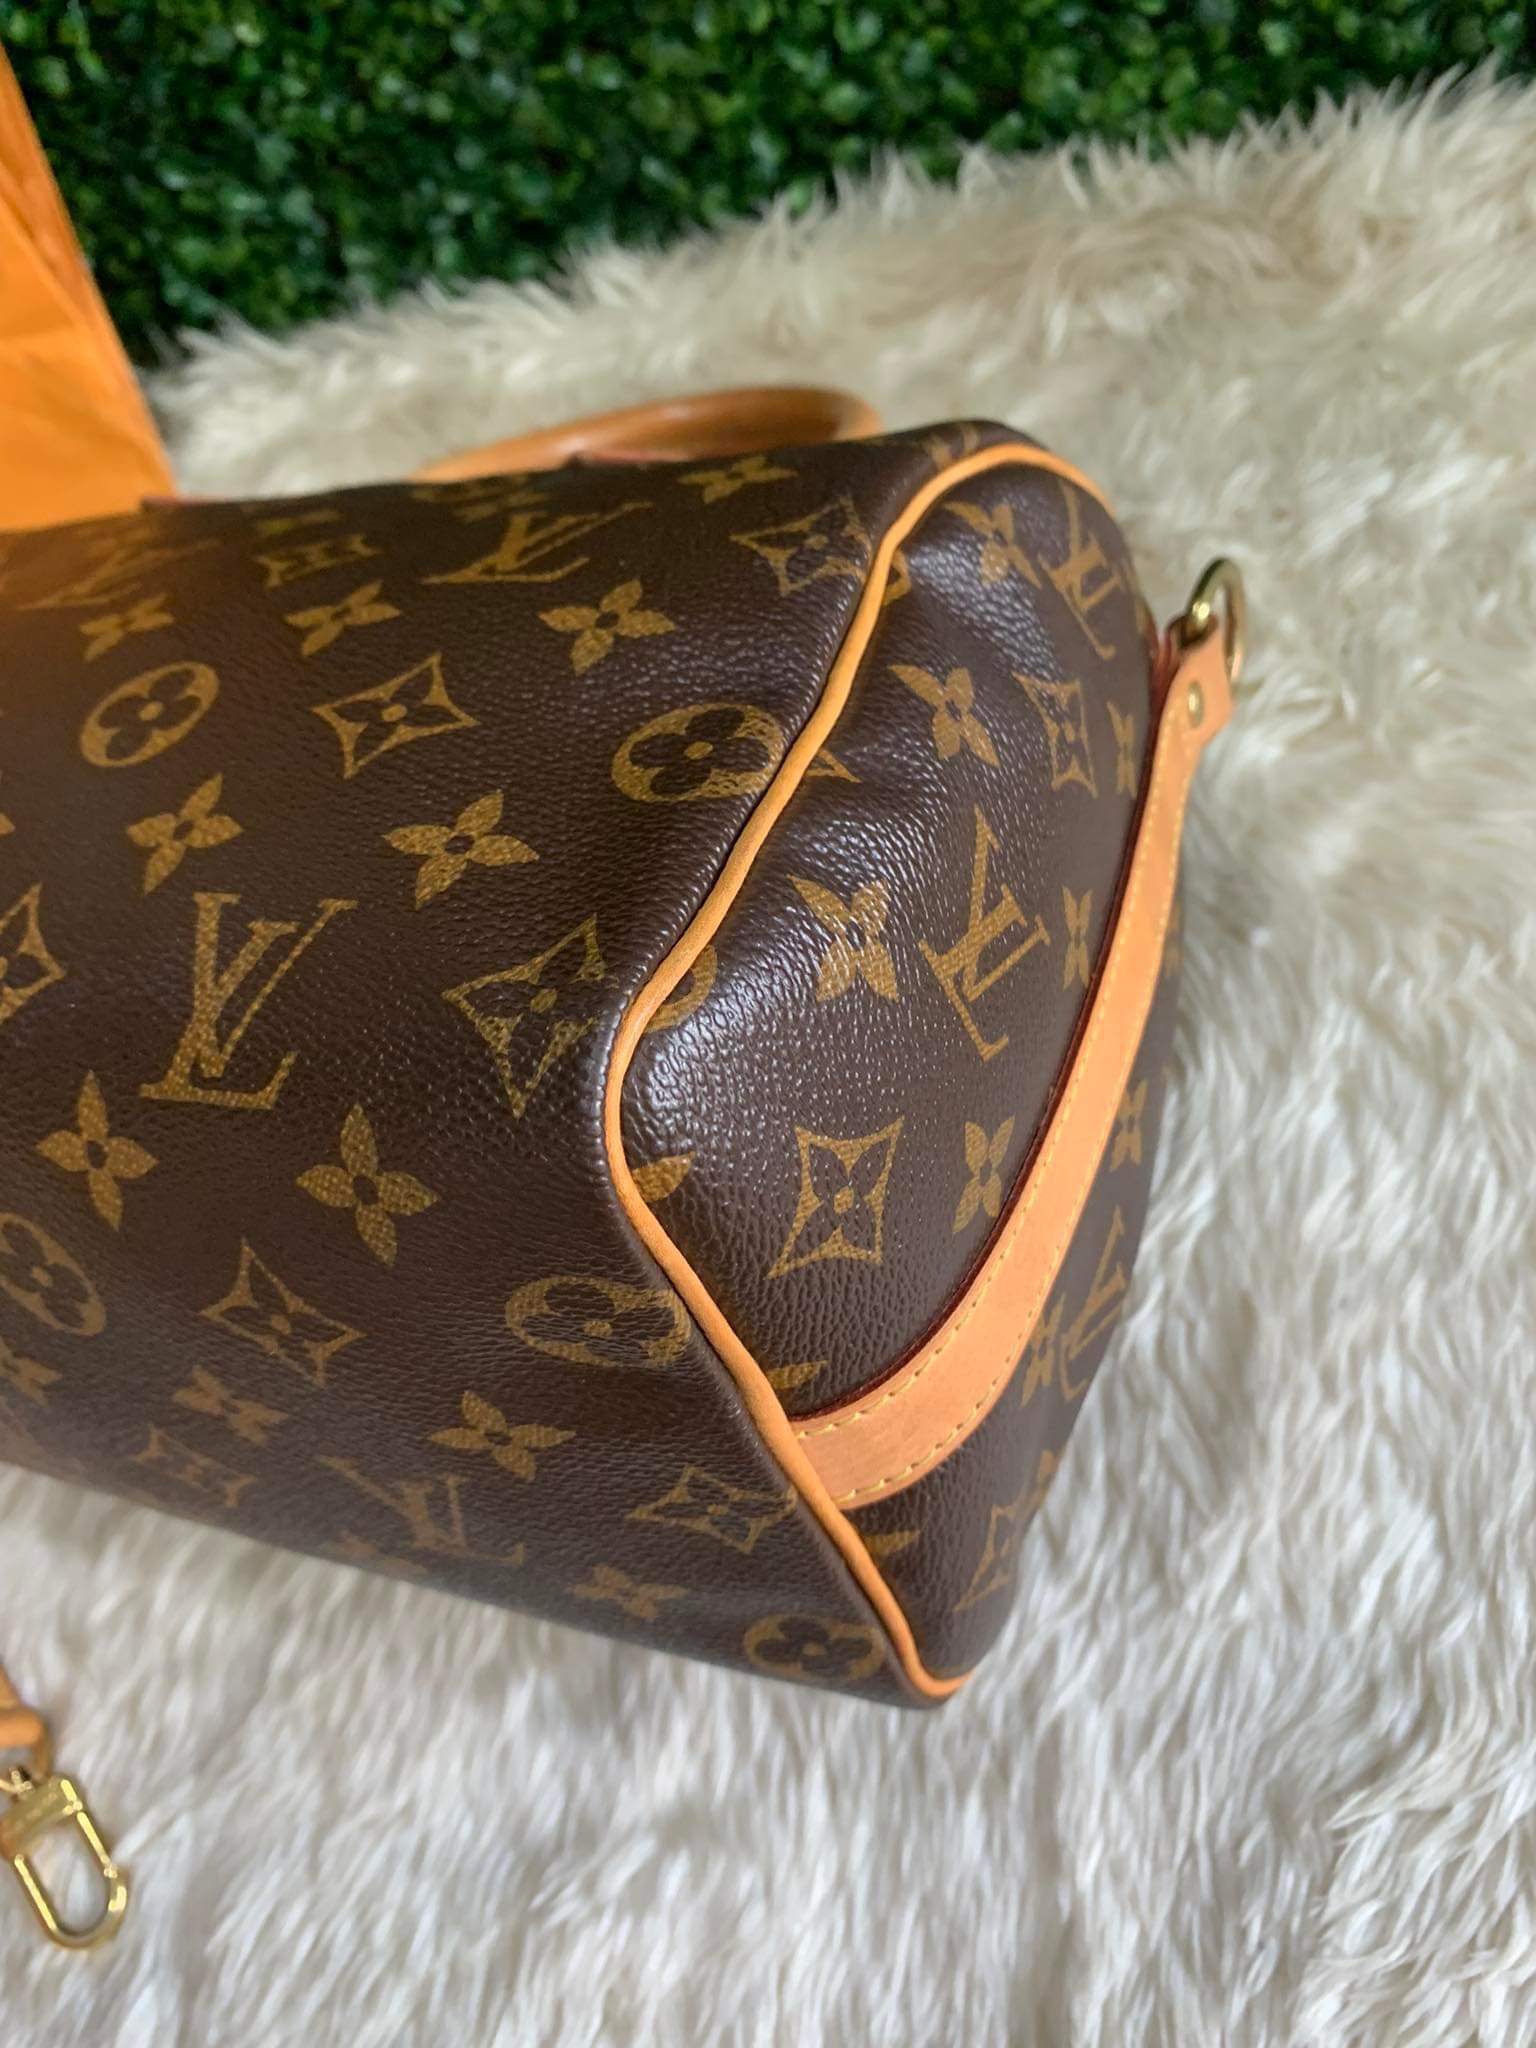 19. Requested Louis Vuitton Epi Speedy 30 Review 